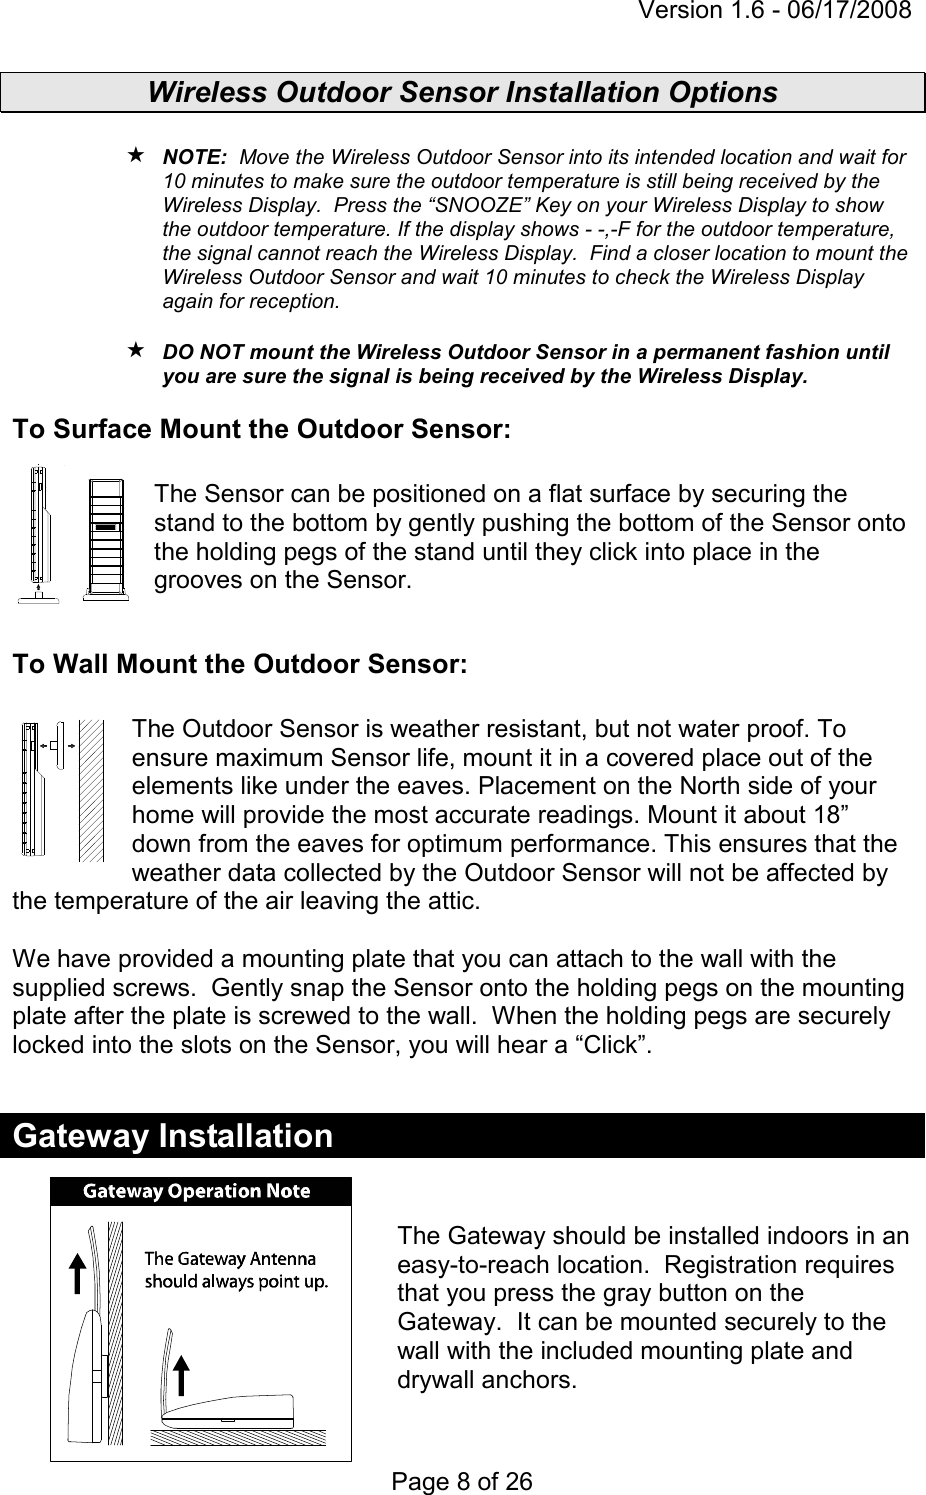 Version 1.6 - 06/17/2008 Page 8 of 26 Wireless Outdoor Sensor Installation Options   NOTE:  Move the Wireless Outdoor Sensor into its intended location and wait for 10 minutes to make sure the outdoor temperature is still being received by the Wireless Display.  Press the “SNOOZE” Key on your Wireless Display to show the outdoor temperature. If the display shows - -,-F for the outdoor temperature, the signal cannot reach the Wireless Display.  Find a closer location to mount the Wireless Outdoor Sensor and wait 10 minutes to check the Wireless Display again for reception.    DO NOT mount the Wireless Outdoor Sensor in a permanent fashion until you are sure the signal is being received by the Wireless Display. To Surface Mount the Outdoor Sensor:  The Sensor can be positioned on a flat surface by securing the stand to the bottom by gently pushing the bottom of the Sensor onto the holding pegs of the stand until they click into place in the grooves on the Sensor.  To Wall Mount the Outdoor Sensor:  The Outdoor Sensor is weather resistant, but not water proof. To ensure maximum Sensor life, mount it in a covered place out of the elements like under the eaves. Placement on the North side of your home will provide the most accurate readings. Mount it about 18” down from the eaves for optimum performance. This ensures that the weather data collected by the Outdoor Sensor will not be affected by the temperature of the air leaving the attic.  We have provided a mounting plate that you can attach to the wall with the supplied screws.  Gently snap the Sensor onto the holding pegs on the mounting plate after the plate is screwed to the wall.  When the holding pegs are securely locked into the slots on the Sensor, you will hear a “Click”.  Gateway Installation   The Gateway should be installed indoors in an easy-to-reach location.  Registration requires that you press the gray button on the Gateway.  It can be mounted securely to the wall with the included mounting plate and drywall anchors.   